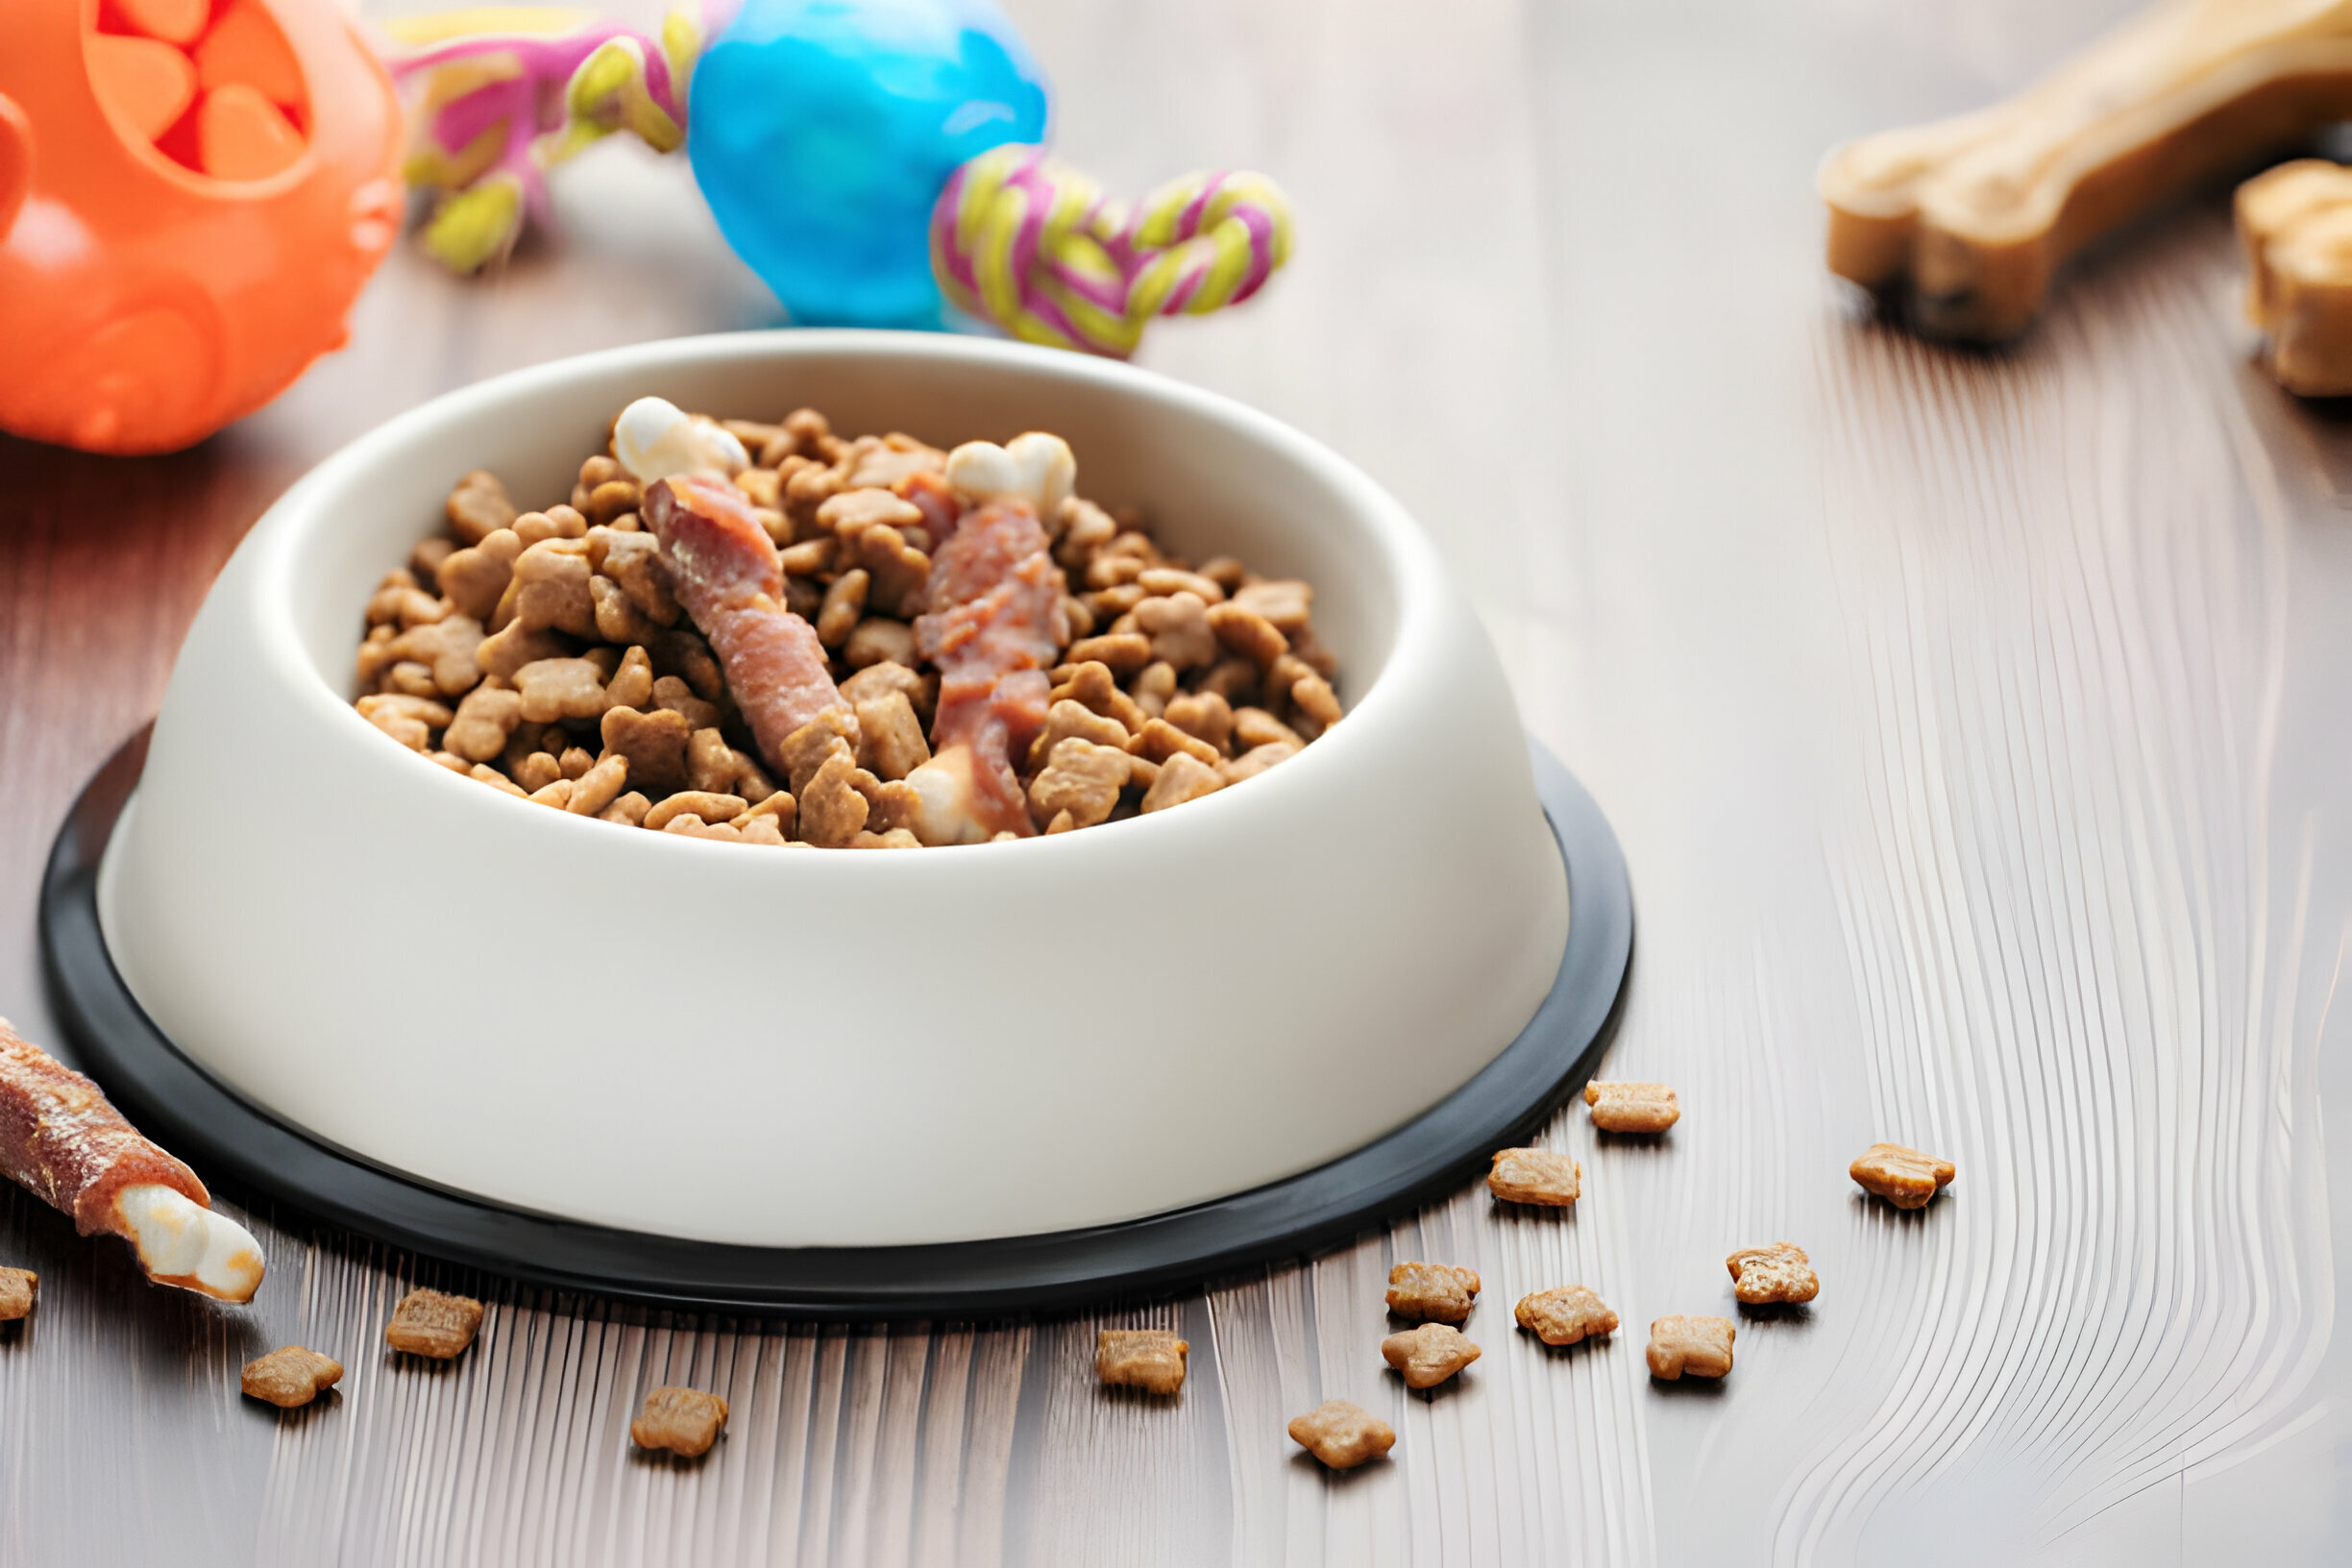 CheckYourDogFood: Your Dog’s Nutrition